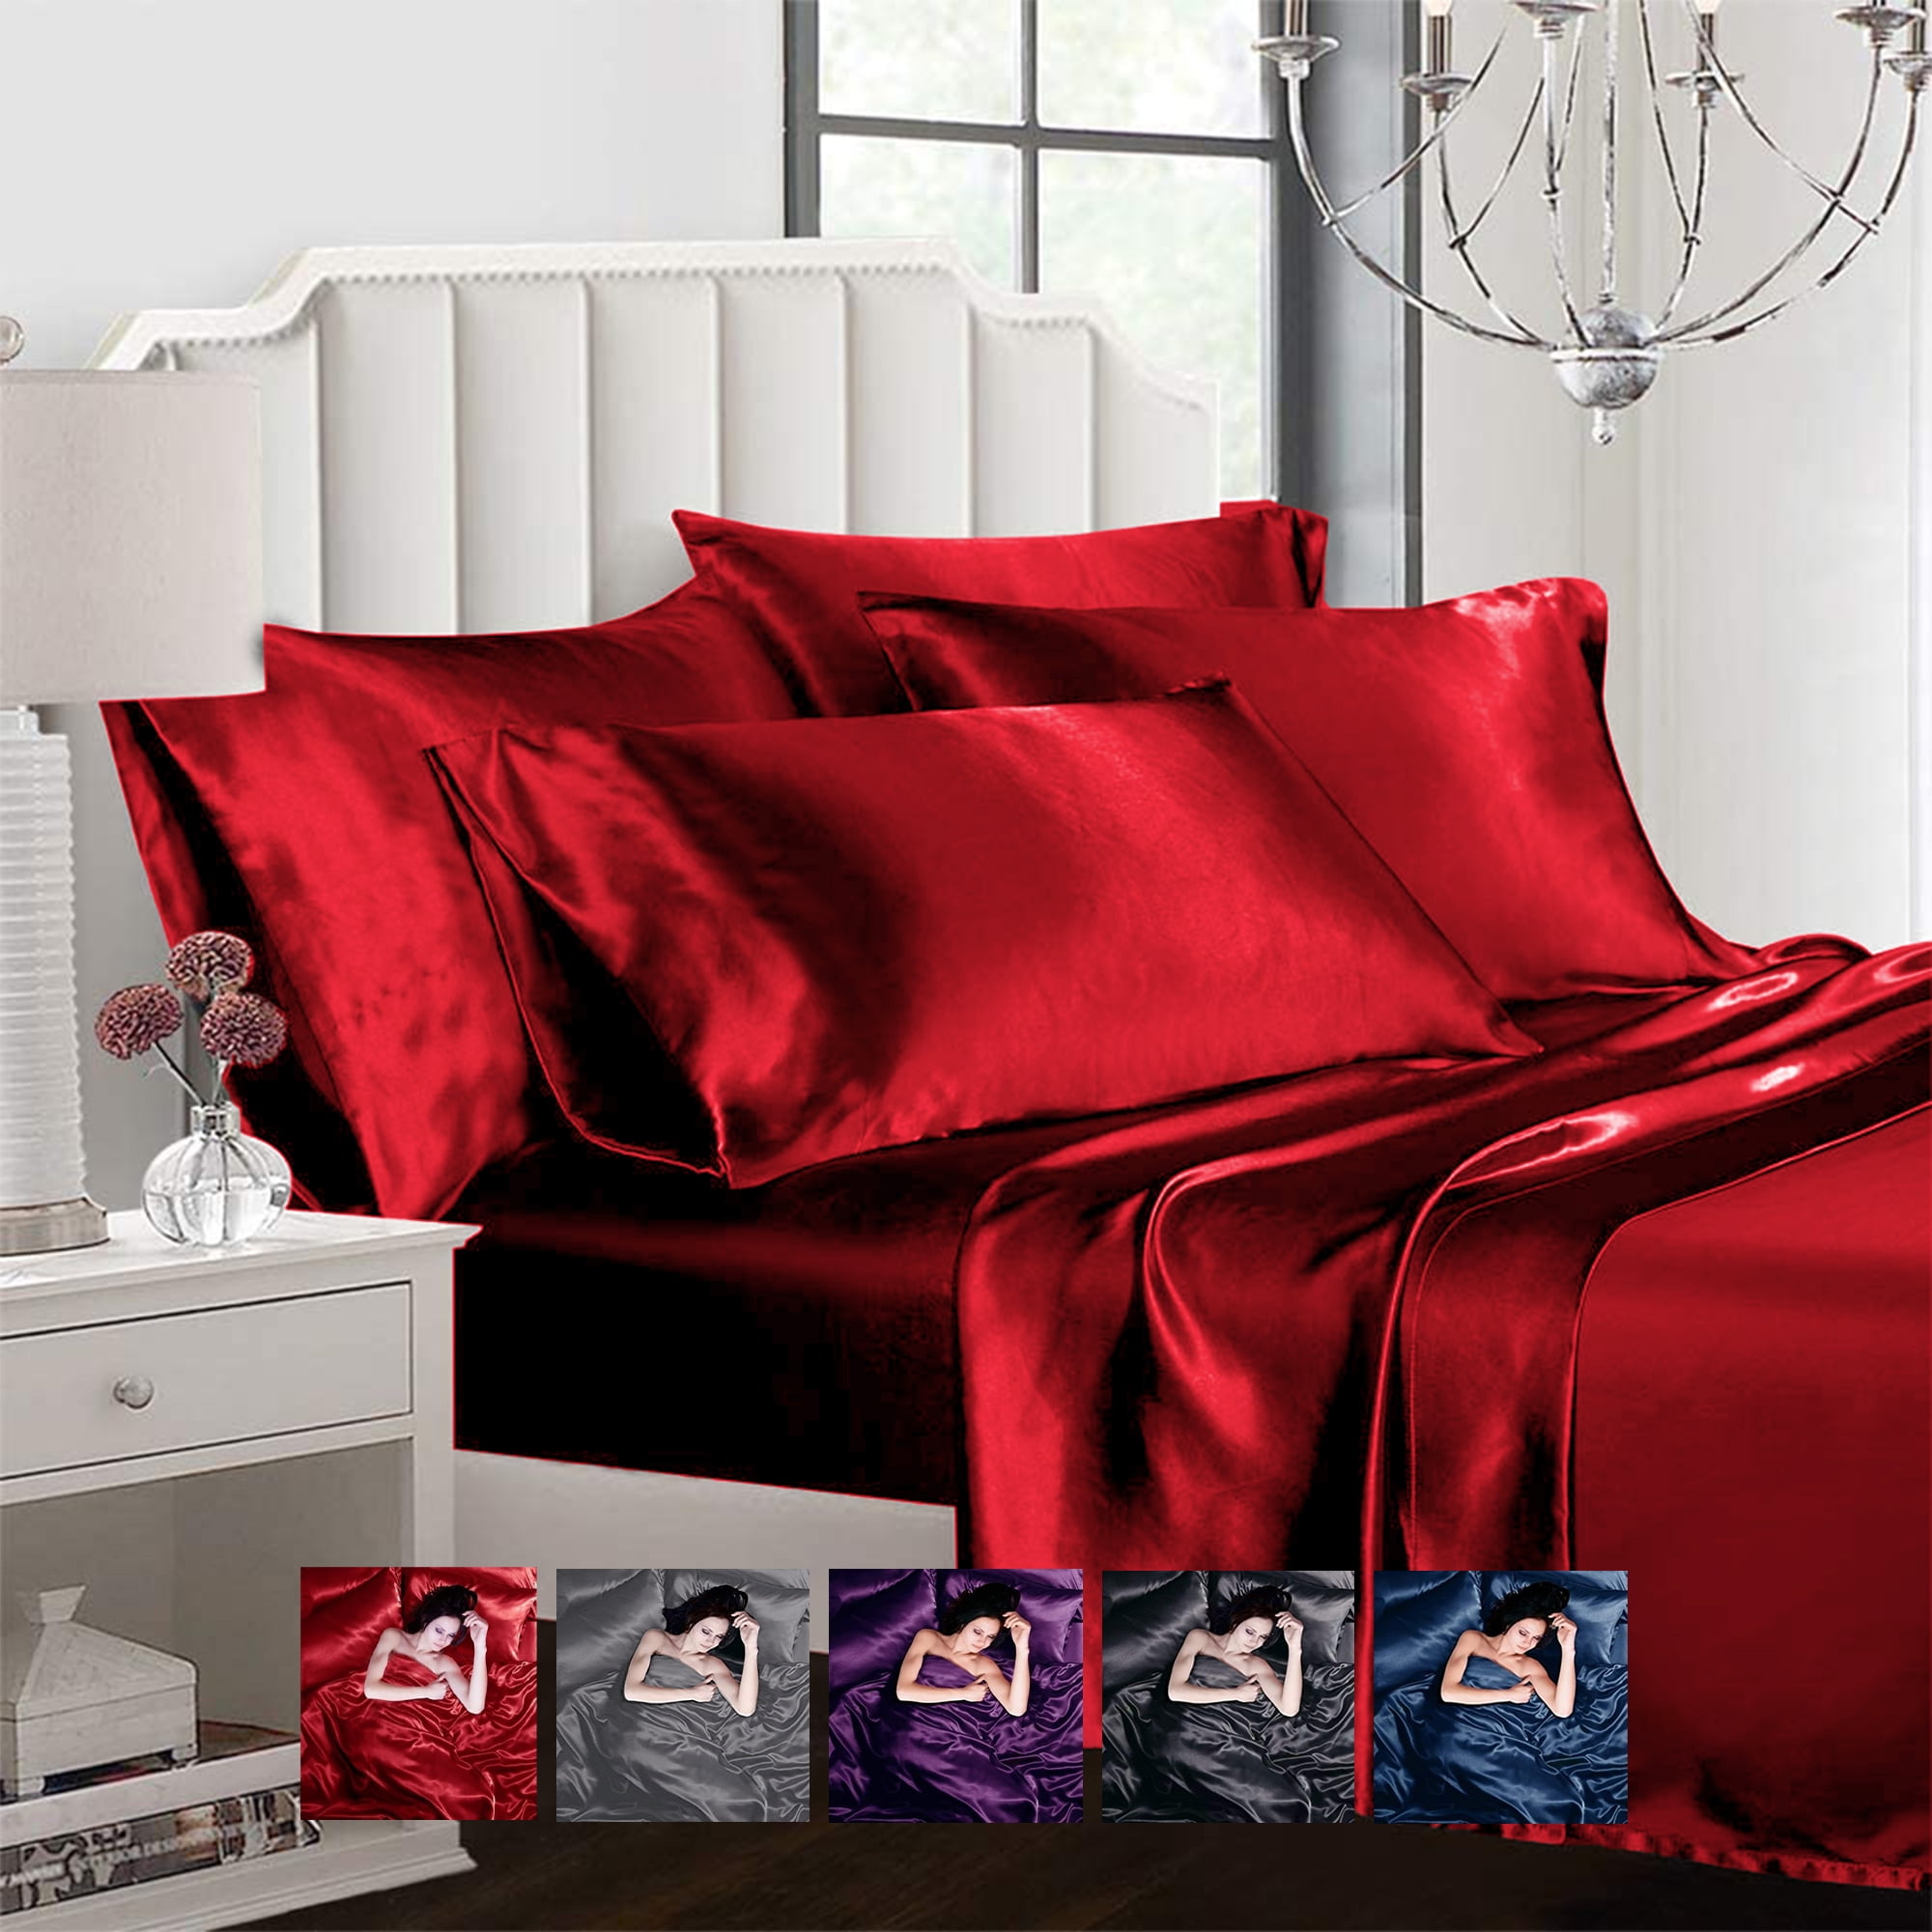 Fitted sheet and Pillowcase pair Flame Retardant Single Bed set,inc Duvet Cover 